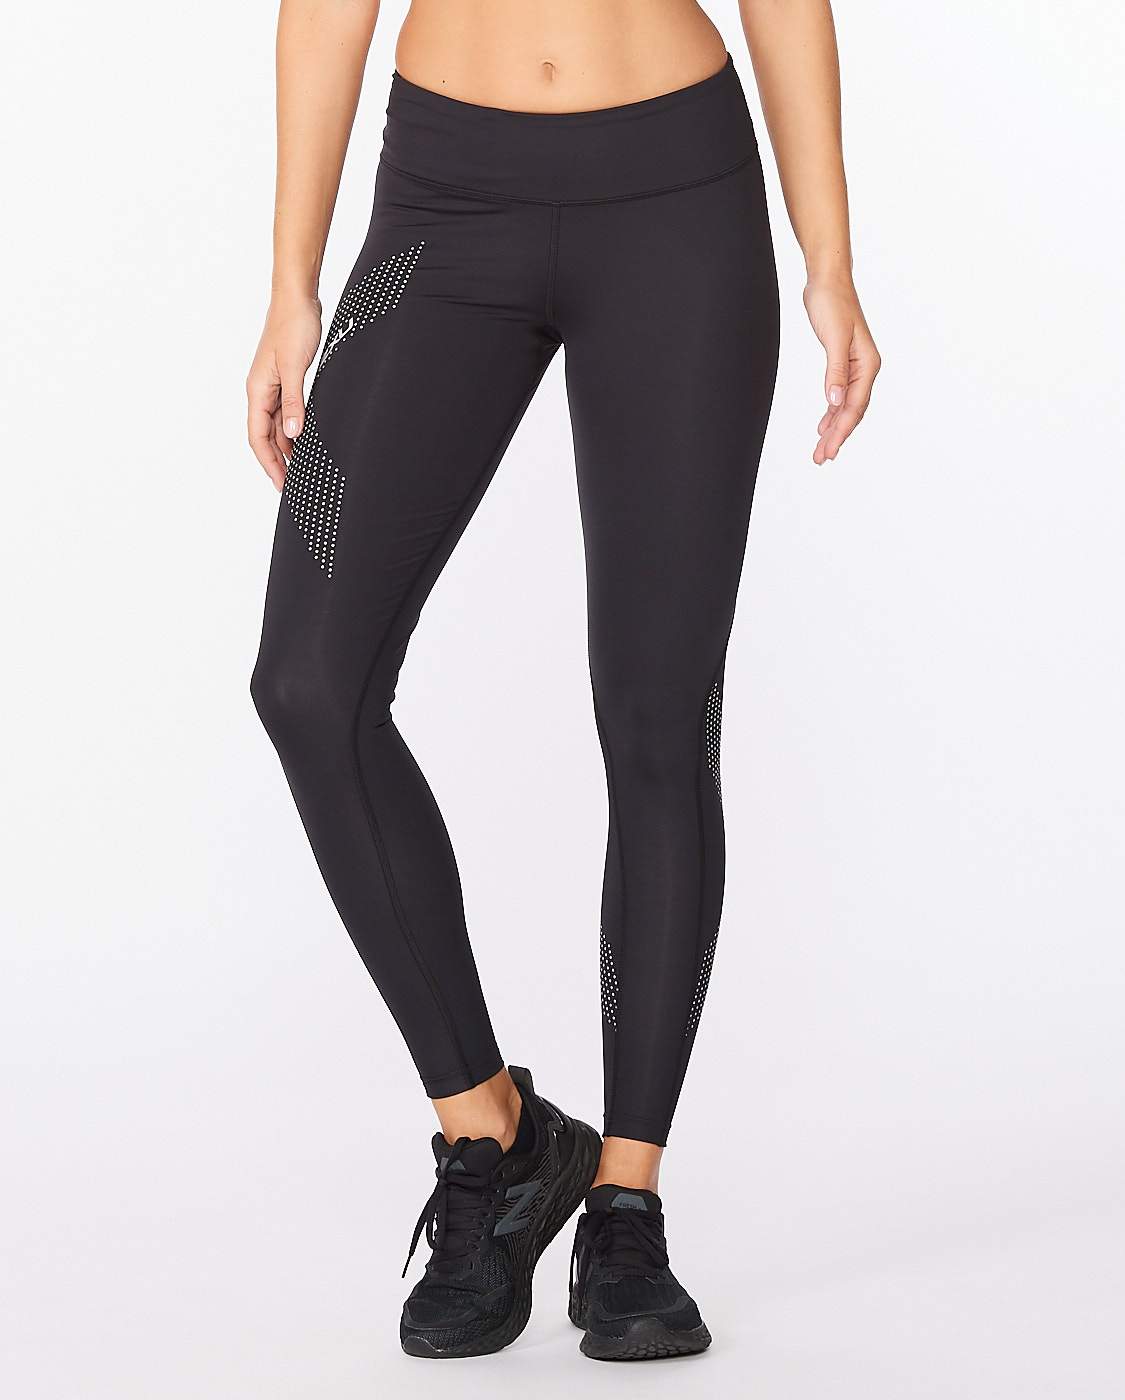 2XU - compression Tights for women Mid-Rise Print Tight with